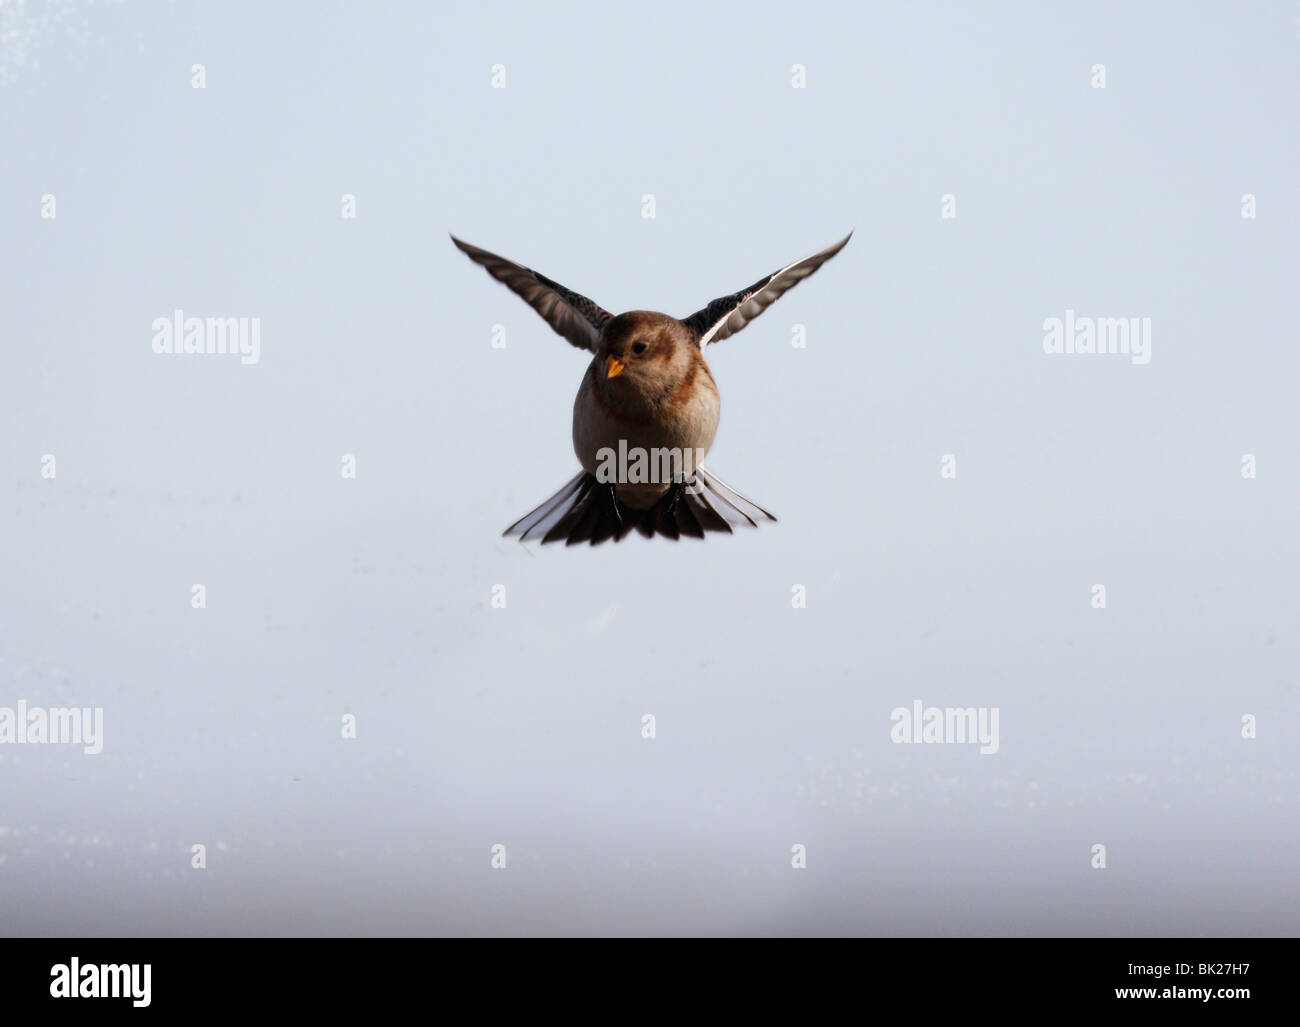 Snow bunting (Plectrophenax nivalis) in flight front view Stock Photo